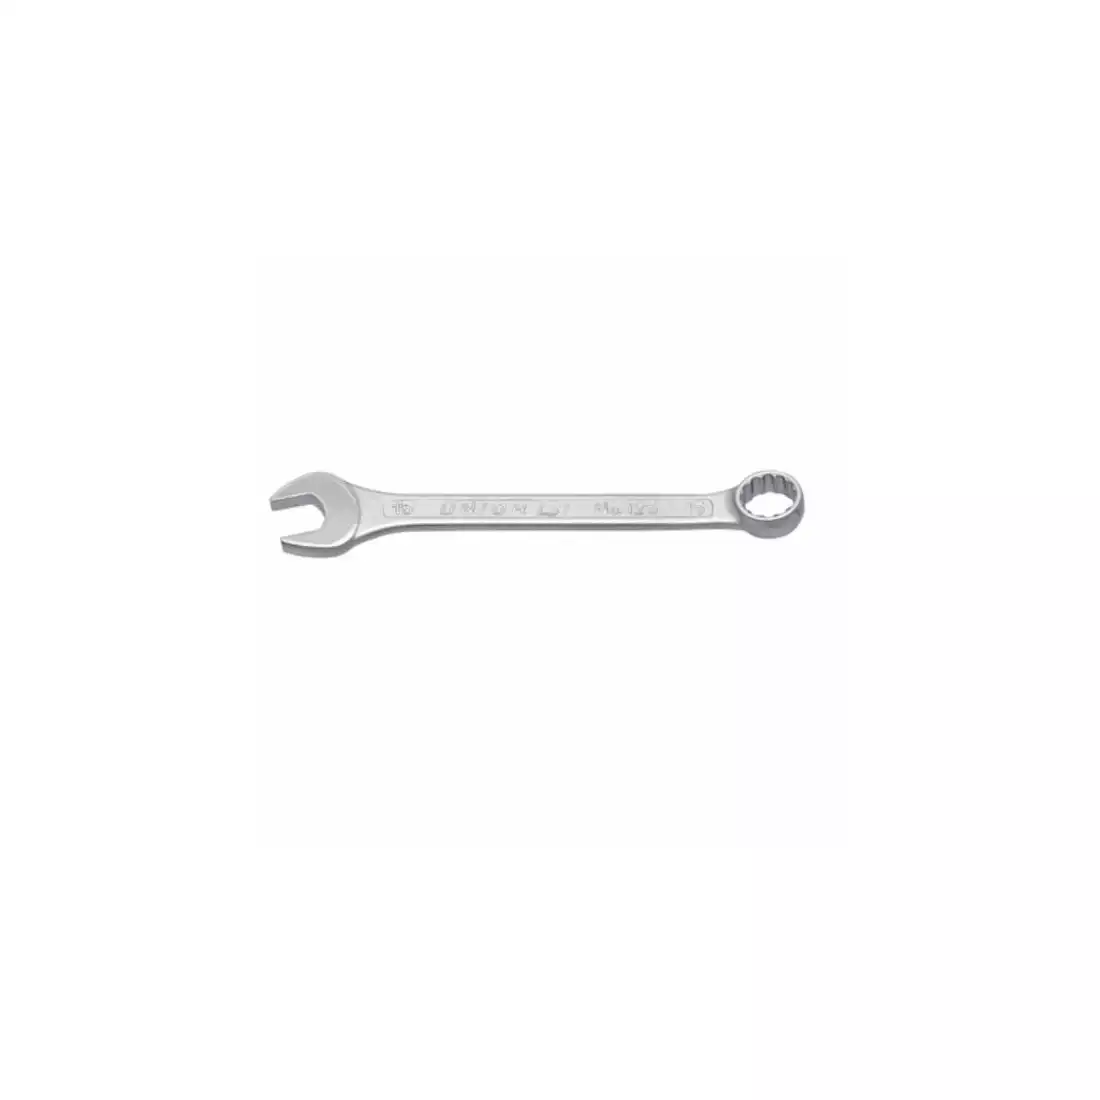 UNIOR combination wrench, short type 9 mm